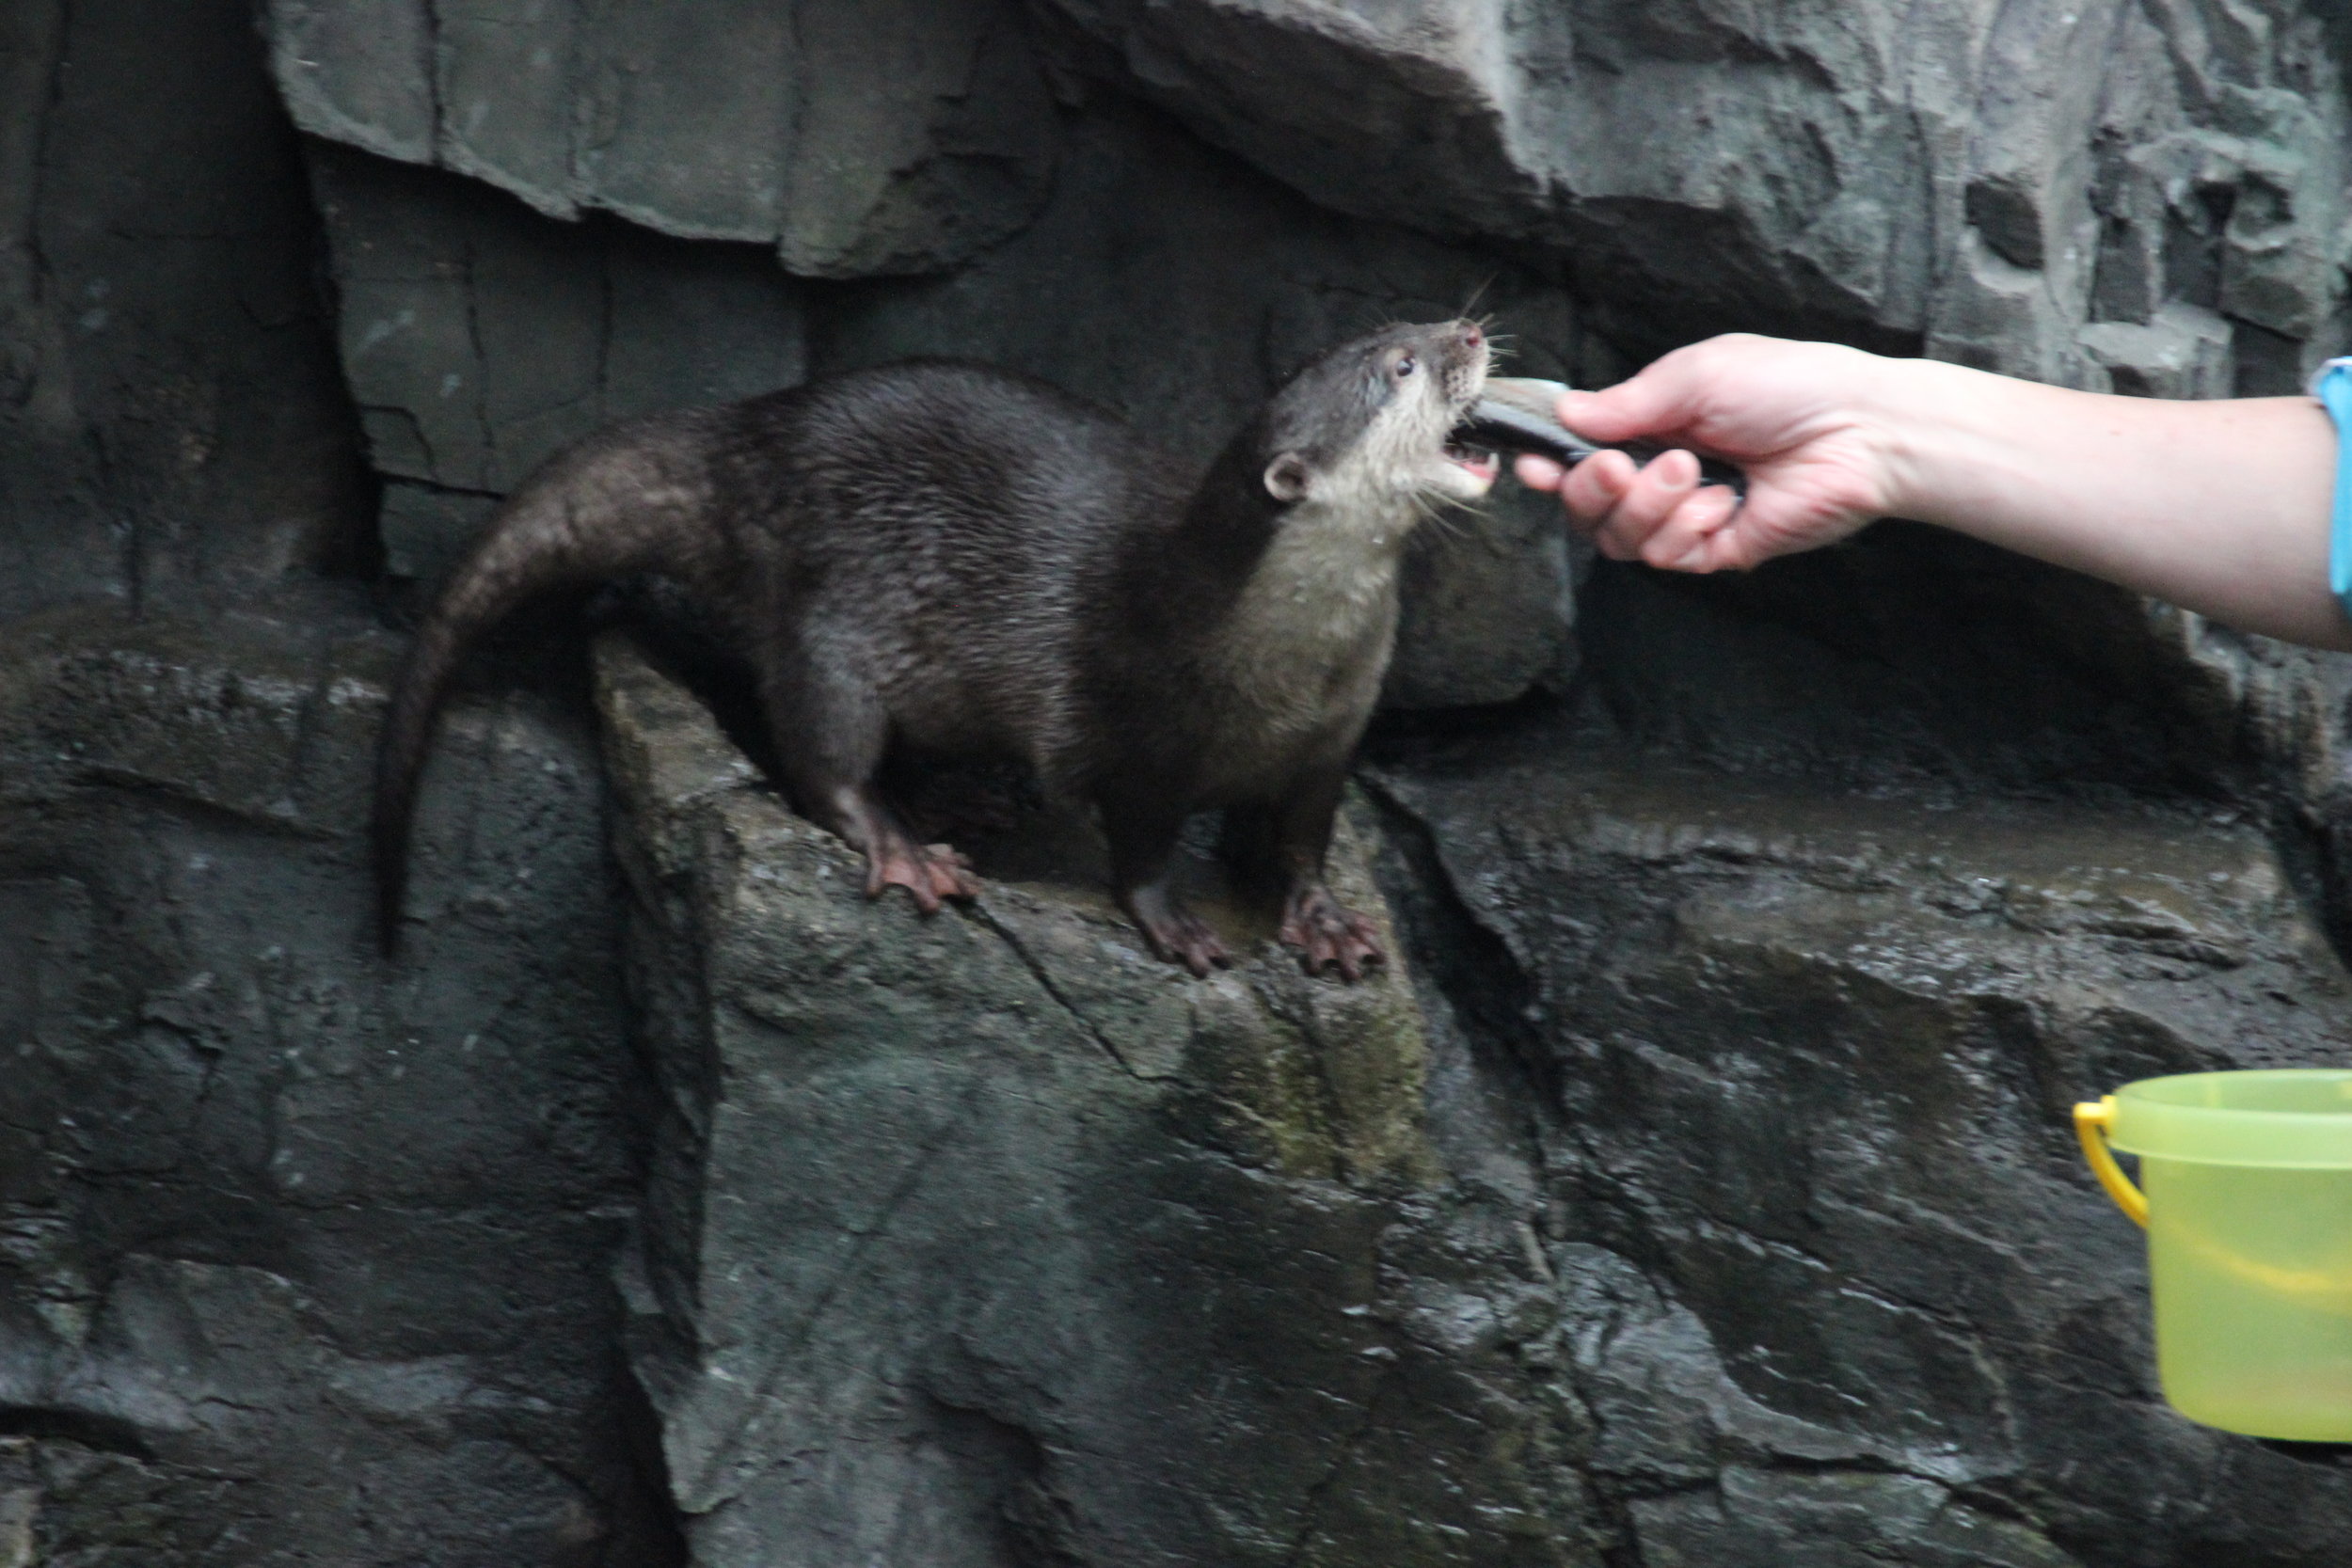 Pampered Otter Is Hand-Fed a Fish